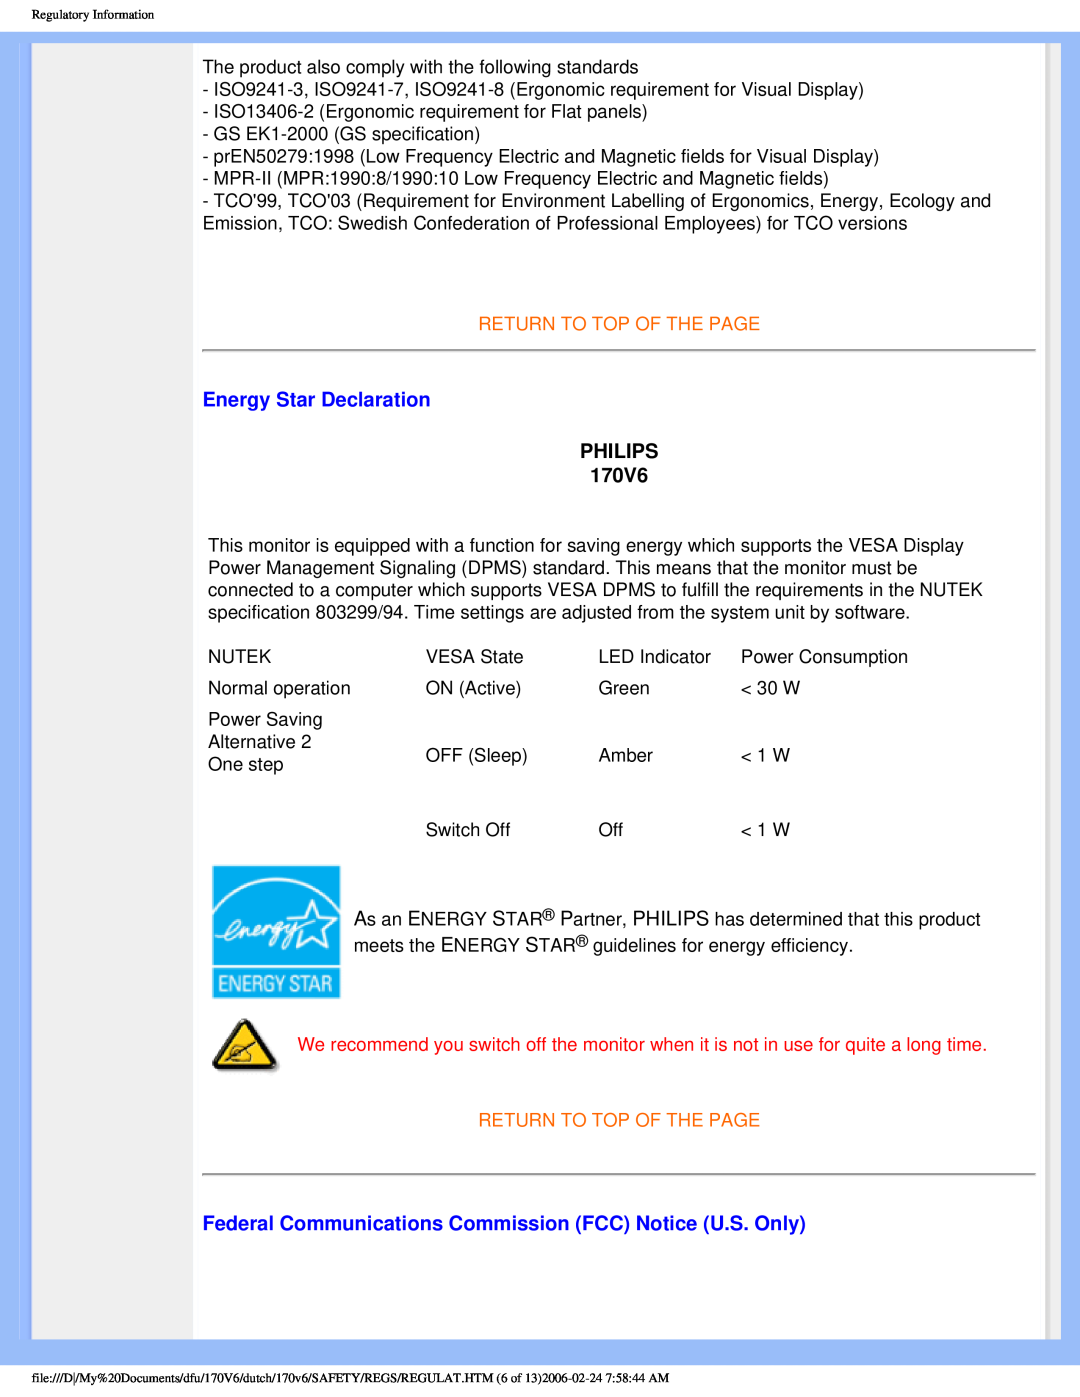 Philips 170V6 user manual Energy Star Declaration, Philips, Return To Top Of The Page 